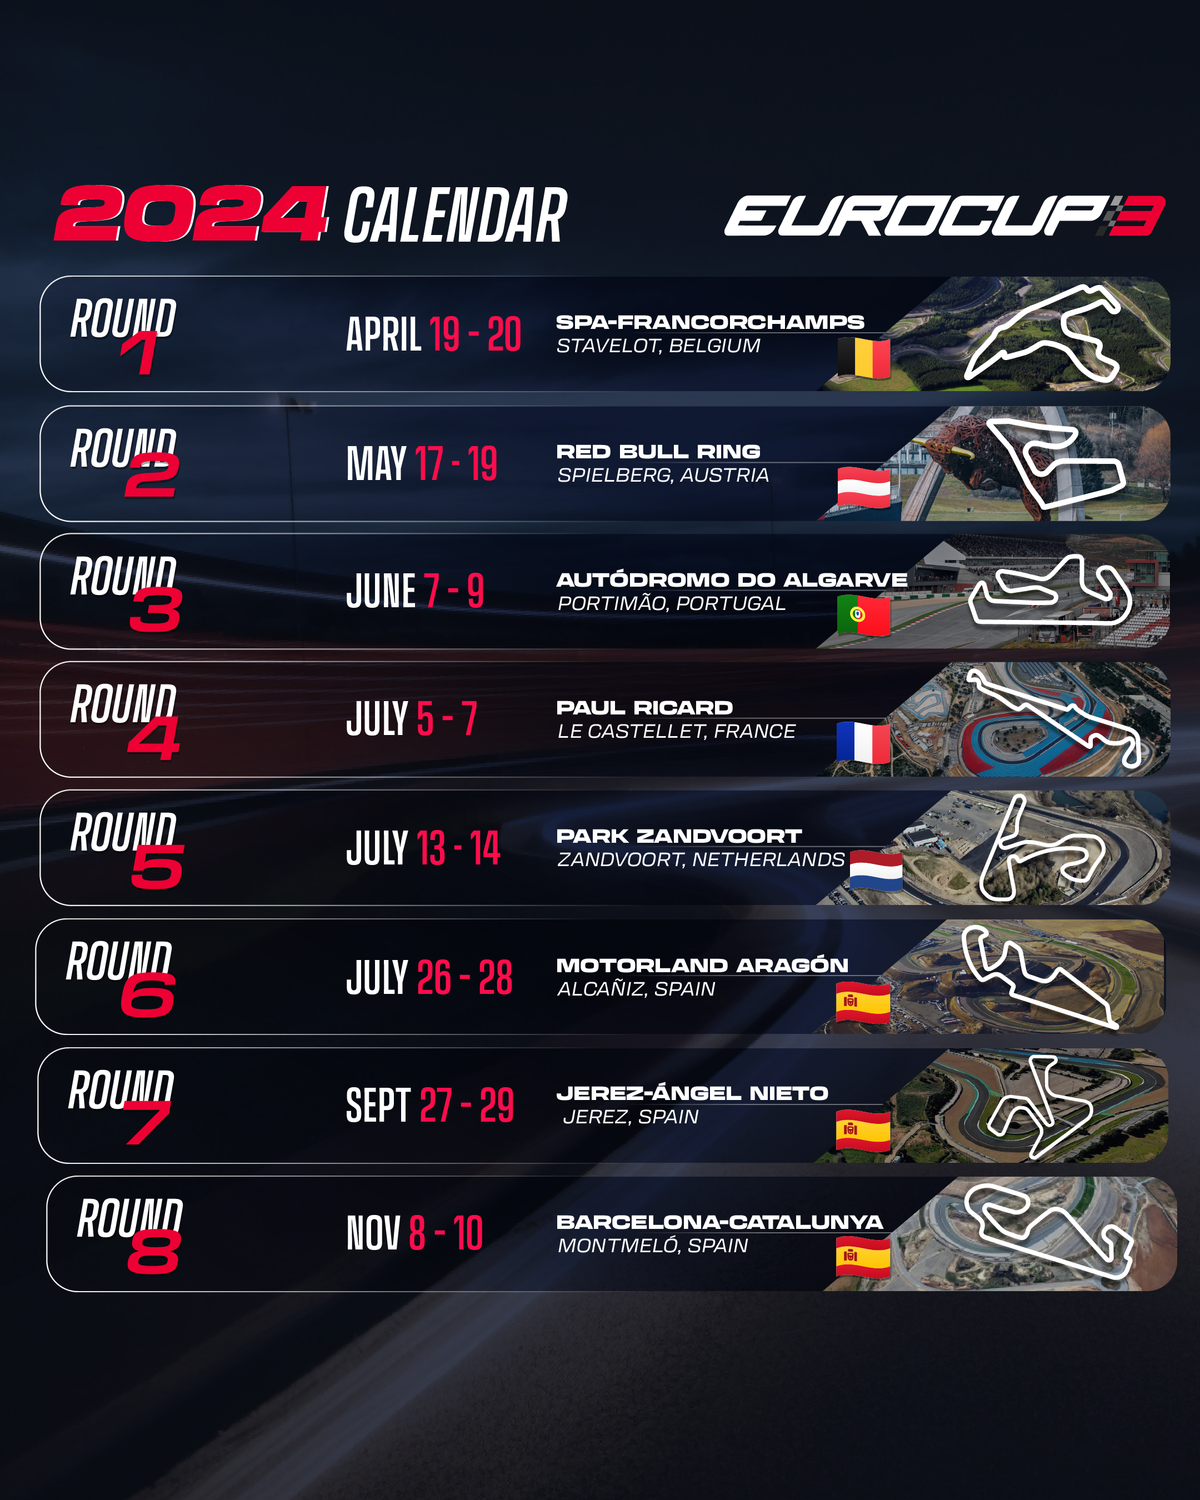 Eurocup-3 2024 Schedule Unveiled: A Grand Tour of Europe's Finest Tracks